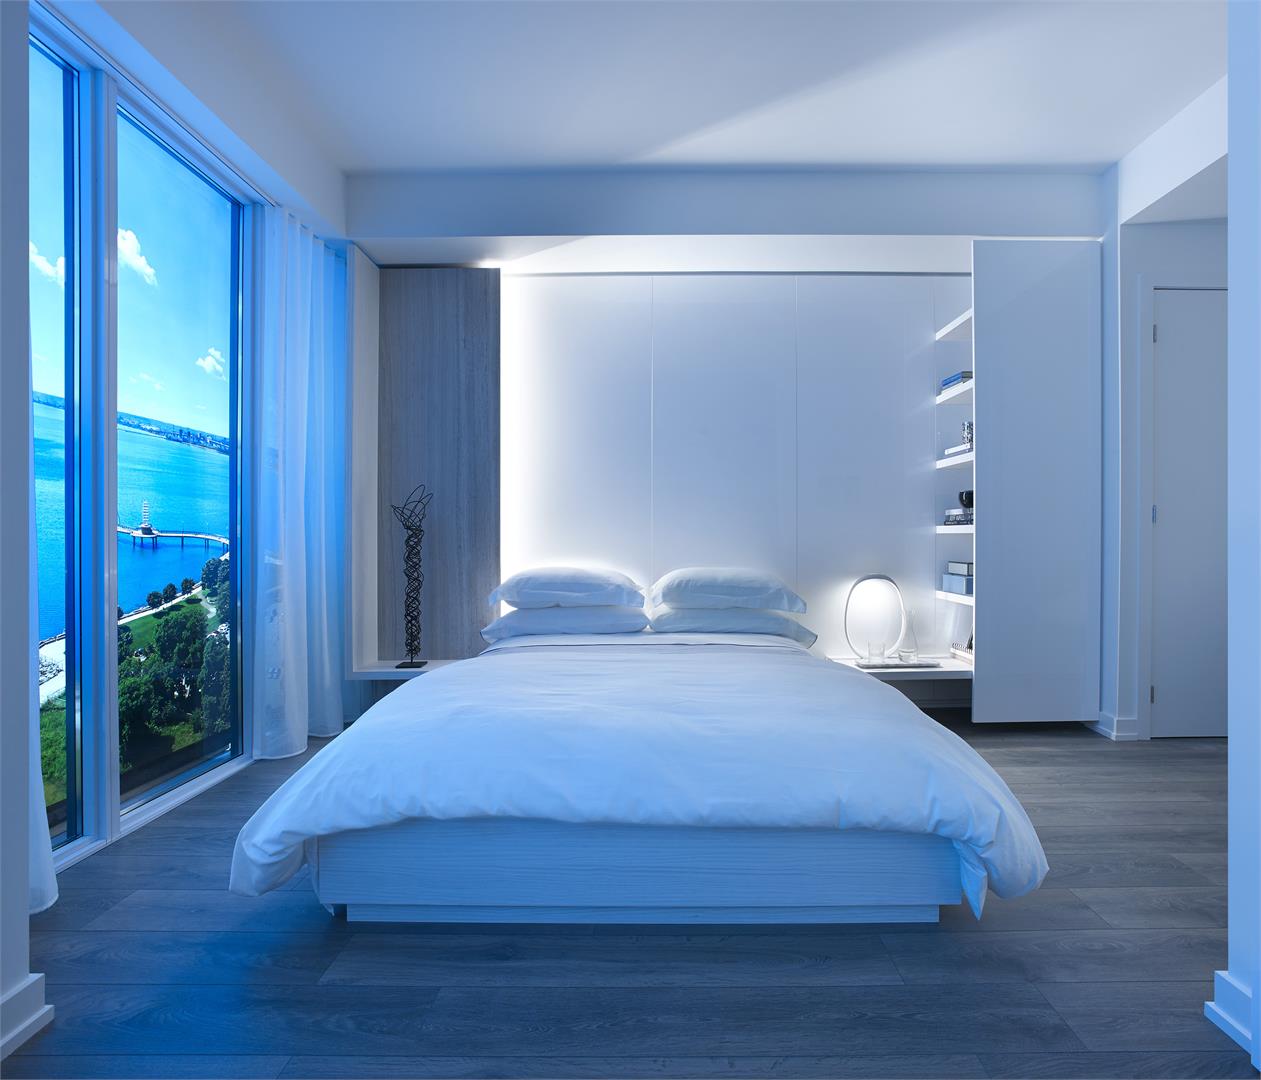 Rendering of Nautique Lakefront Residences suite bedroom at night.